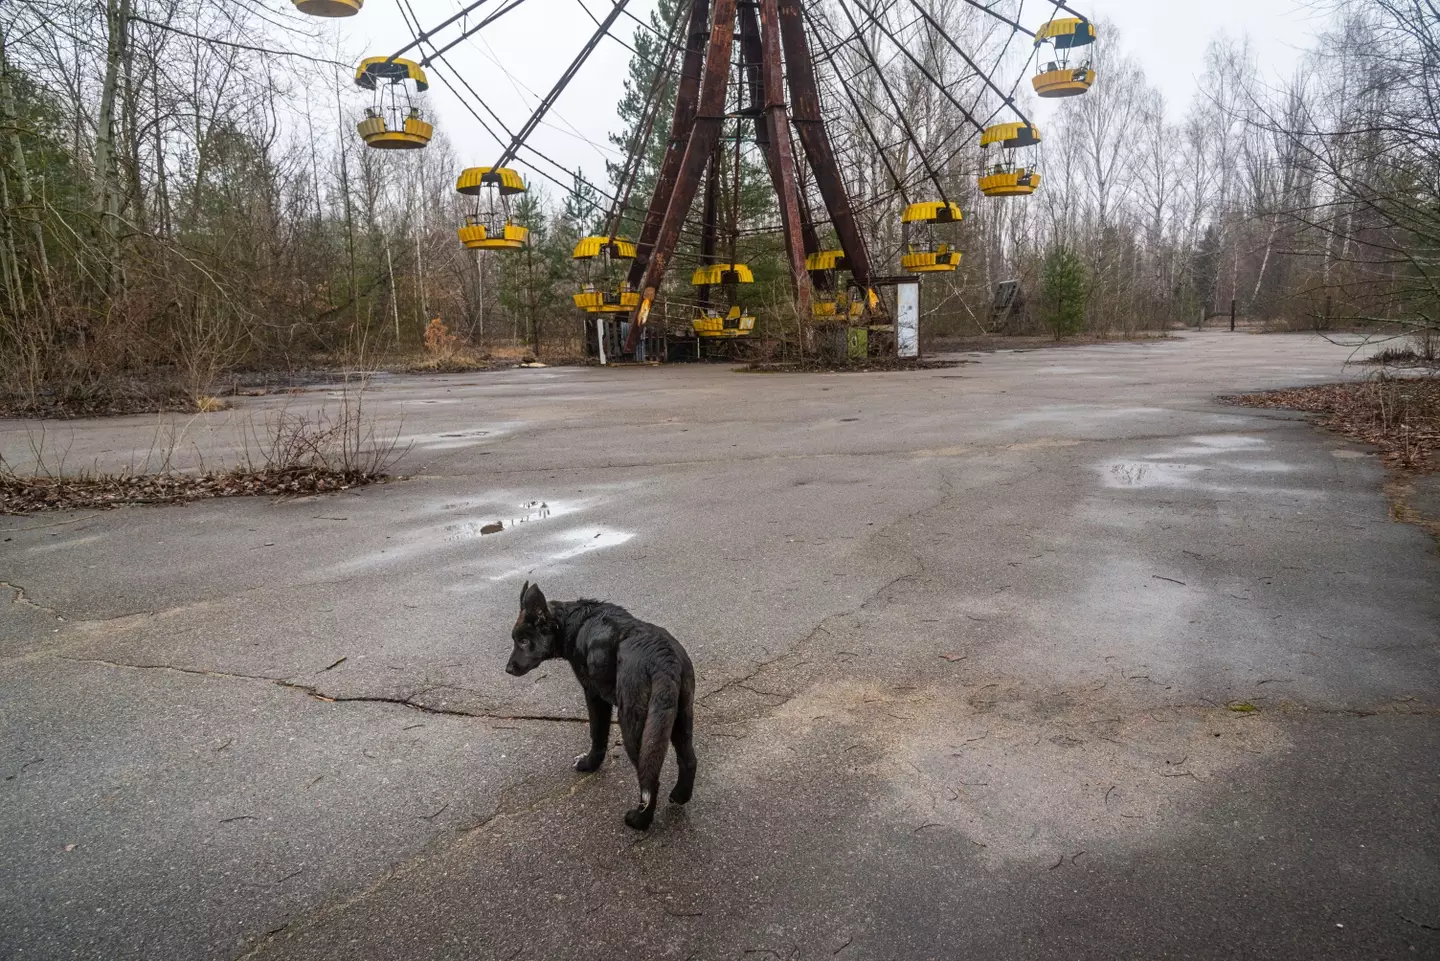 Scientists could tell how close the dogs lived to Chernobyl.